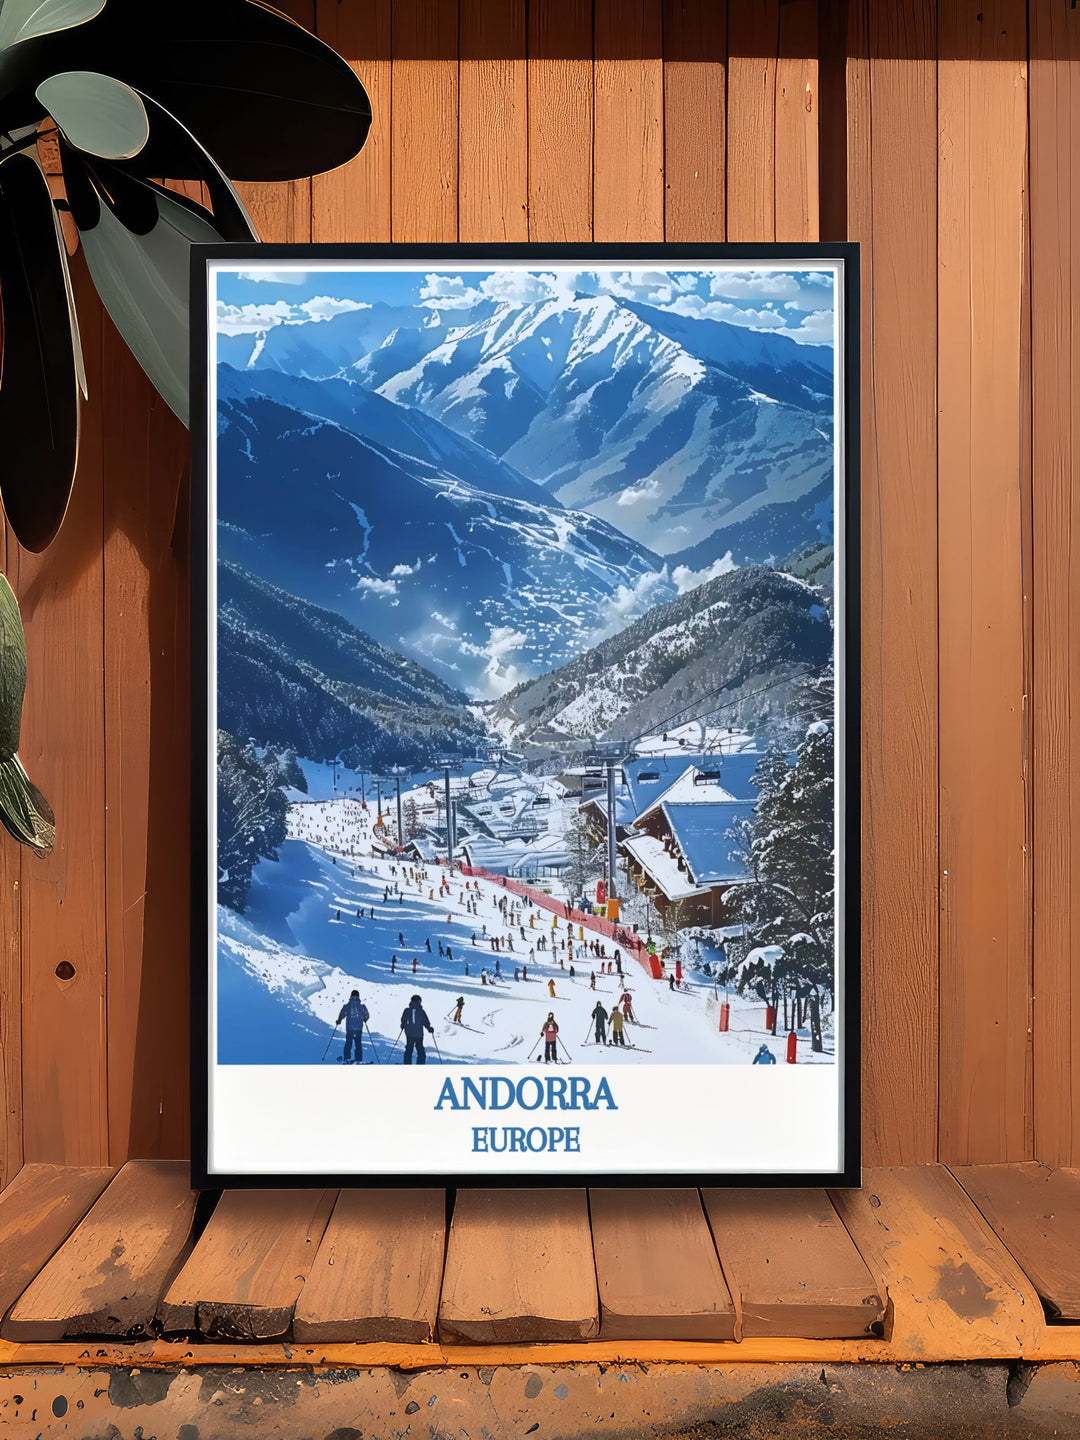 Stylish Andorra modern decor print, illustrating the blend of tradition and modernity in Andorran wall art.